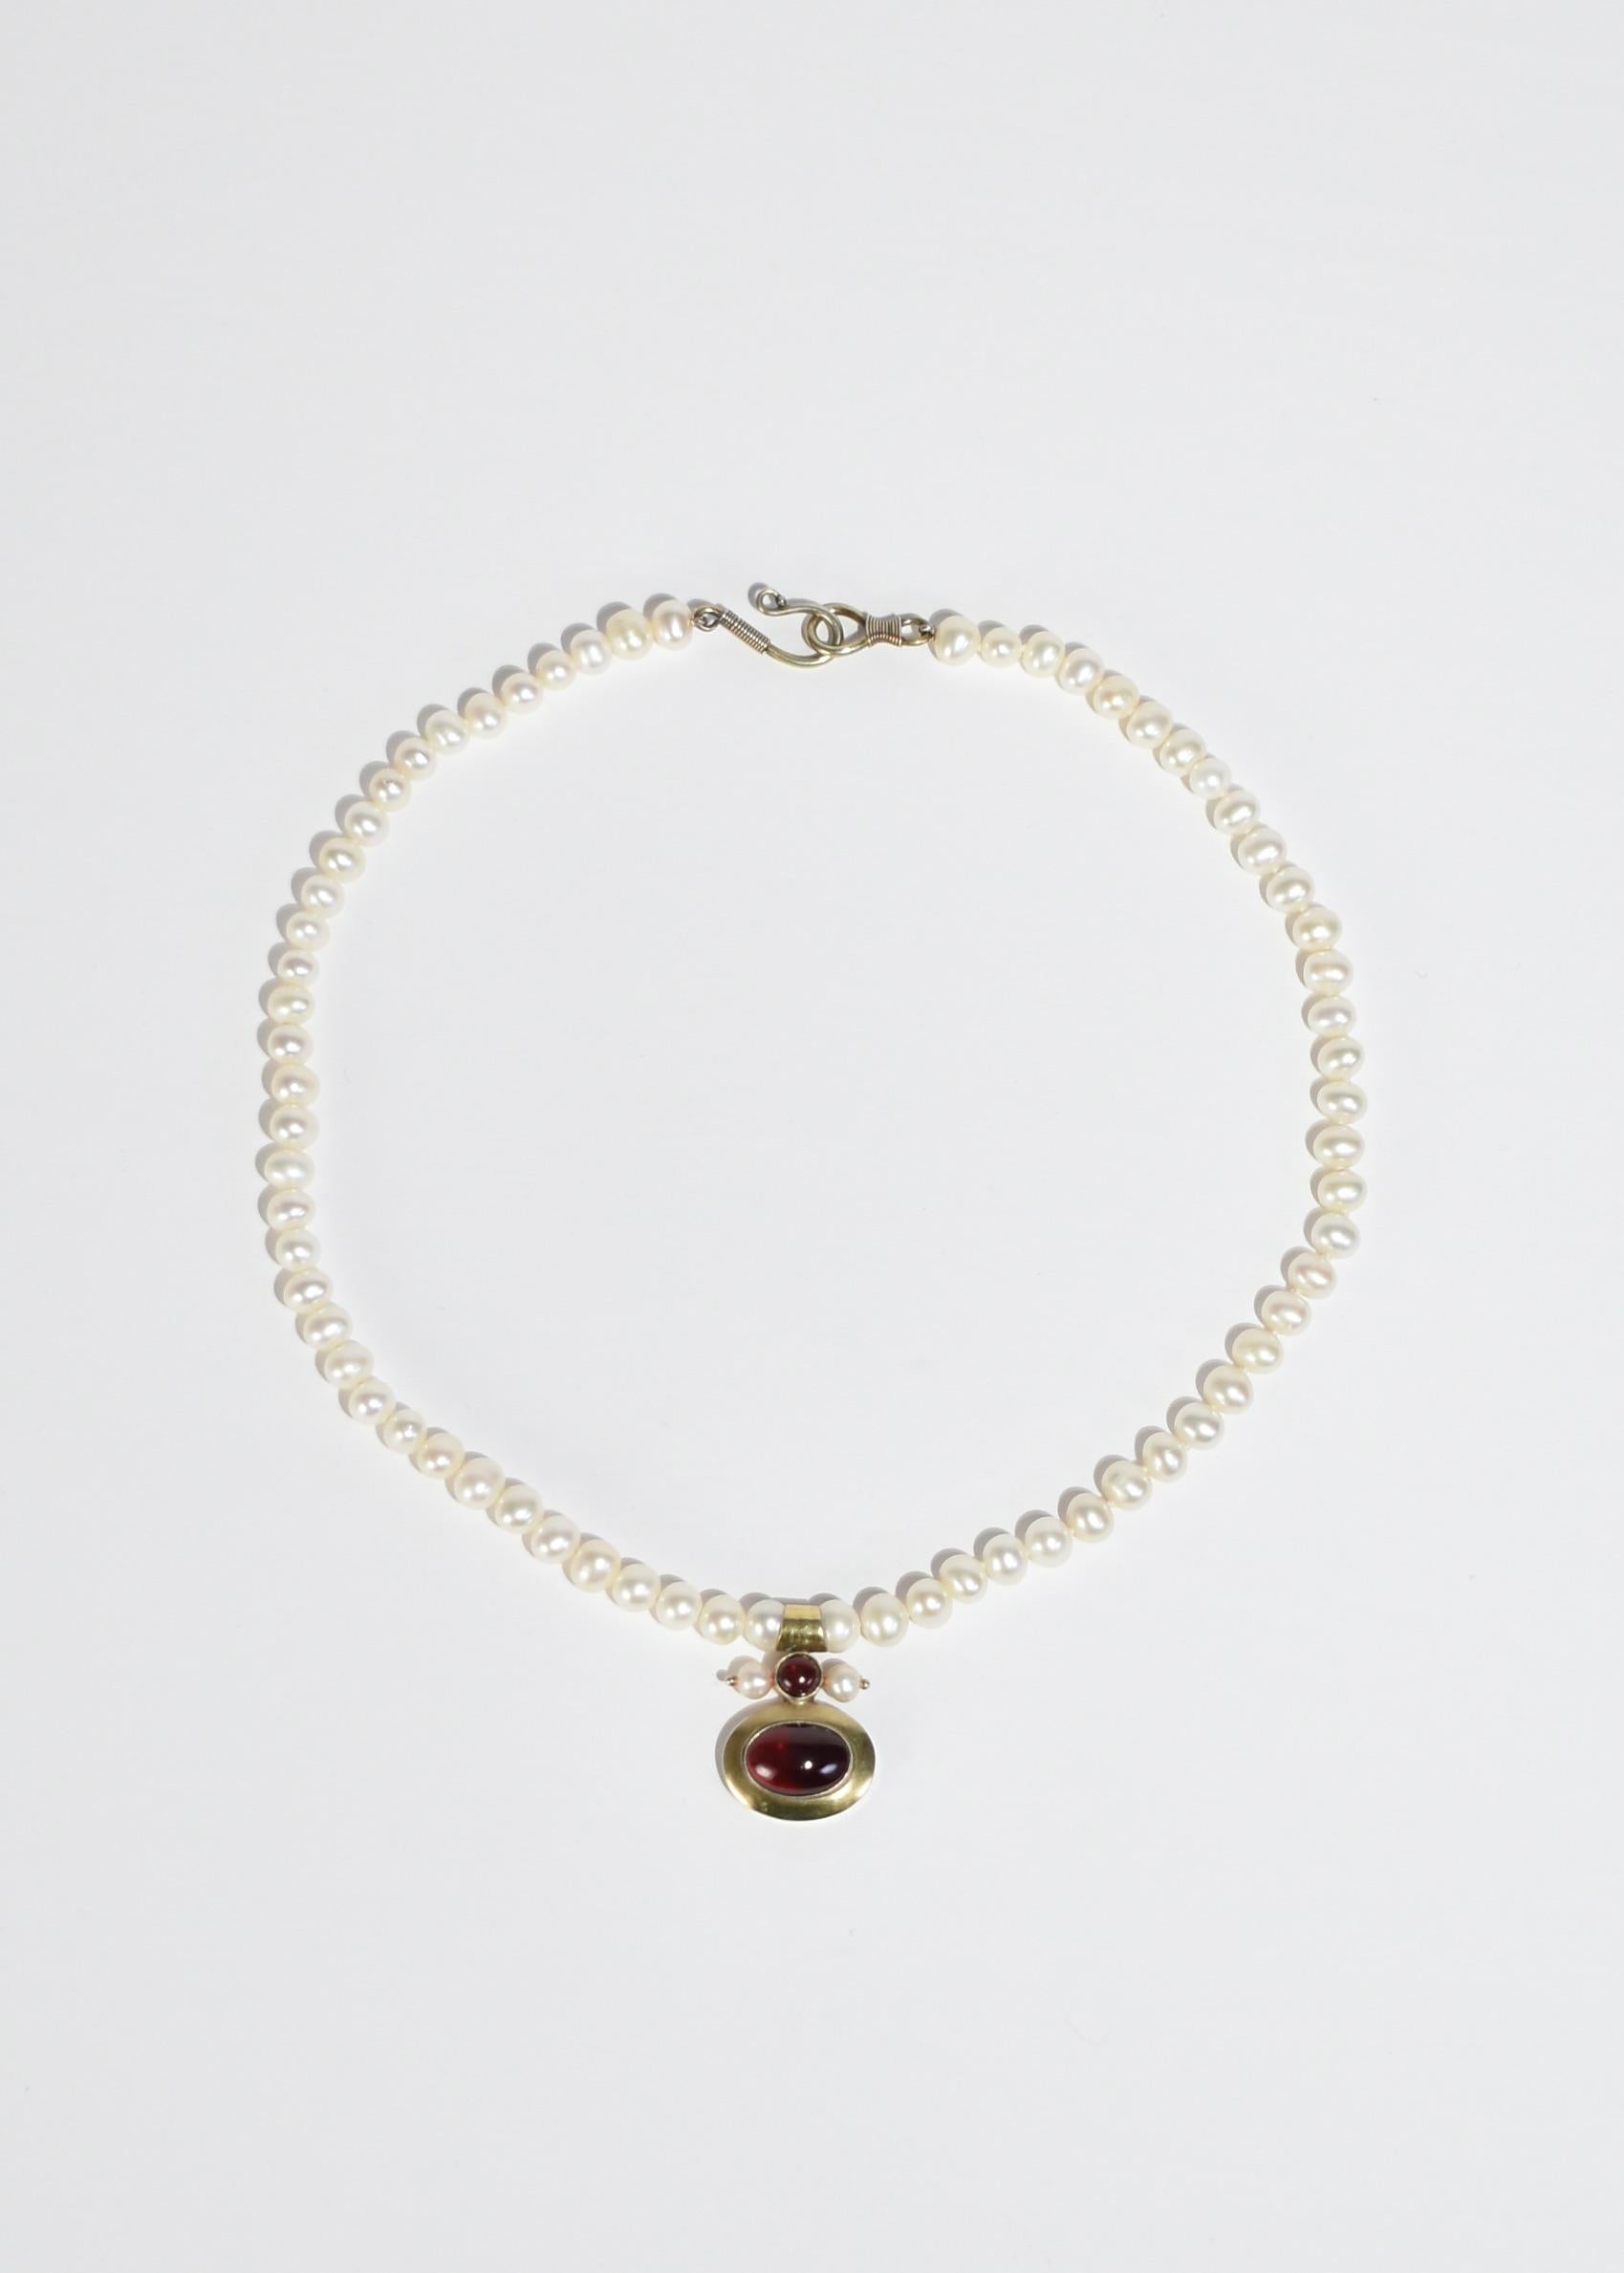 Vintage pearl necklace with gold garnet pendant, hook and eye closure. Stamped MMA 925. 

Material: Sterling silver, gold vermeil, pearl, garnet.

We recommend storing in a dry place and periodic polishing with a cloth.